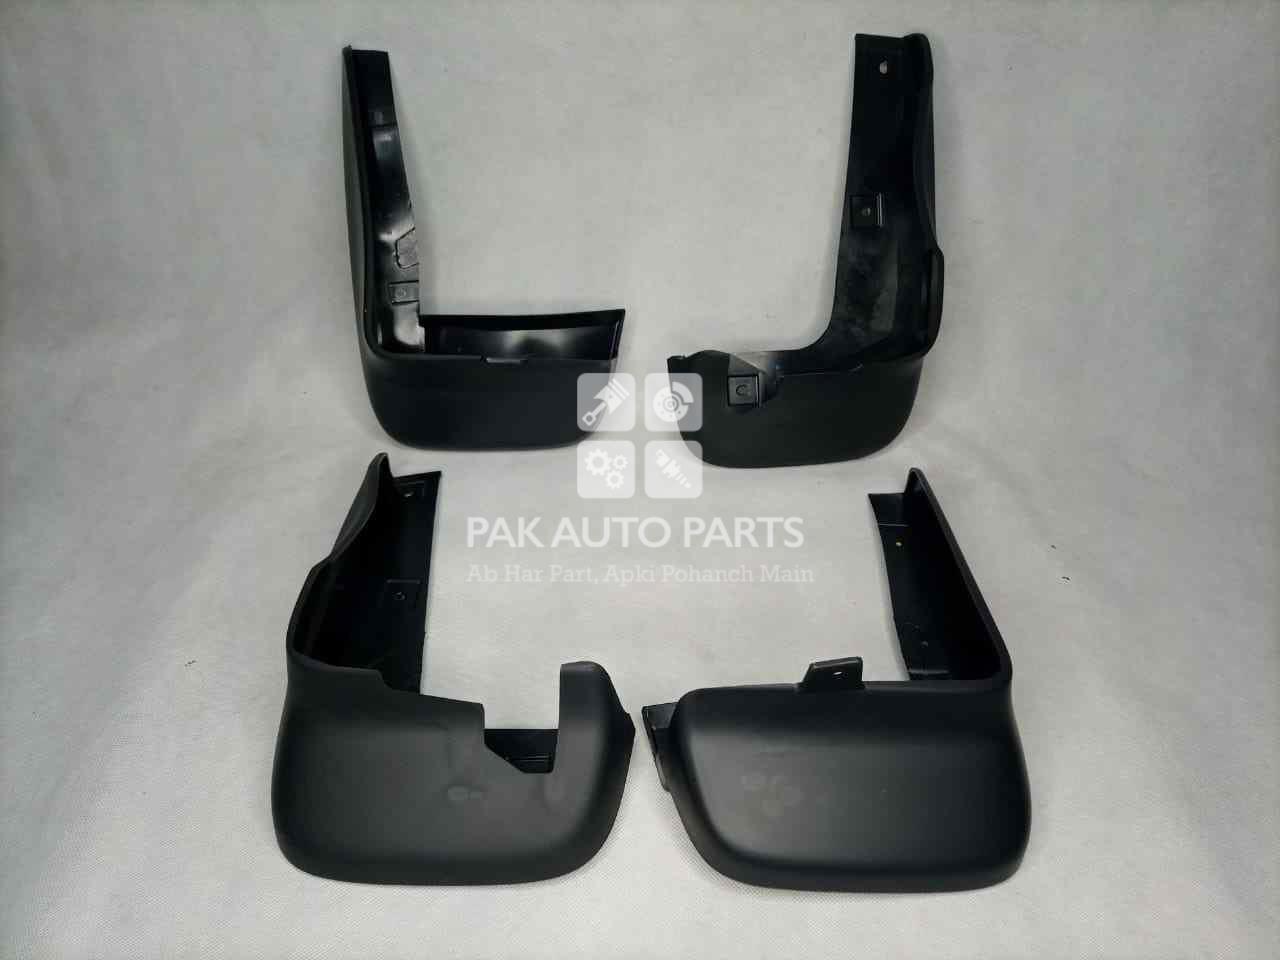 Picture of Honda City 2009-2014 Rear Mud Flaps